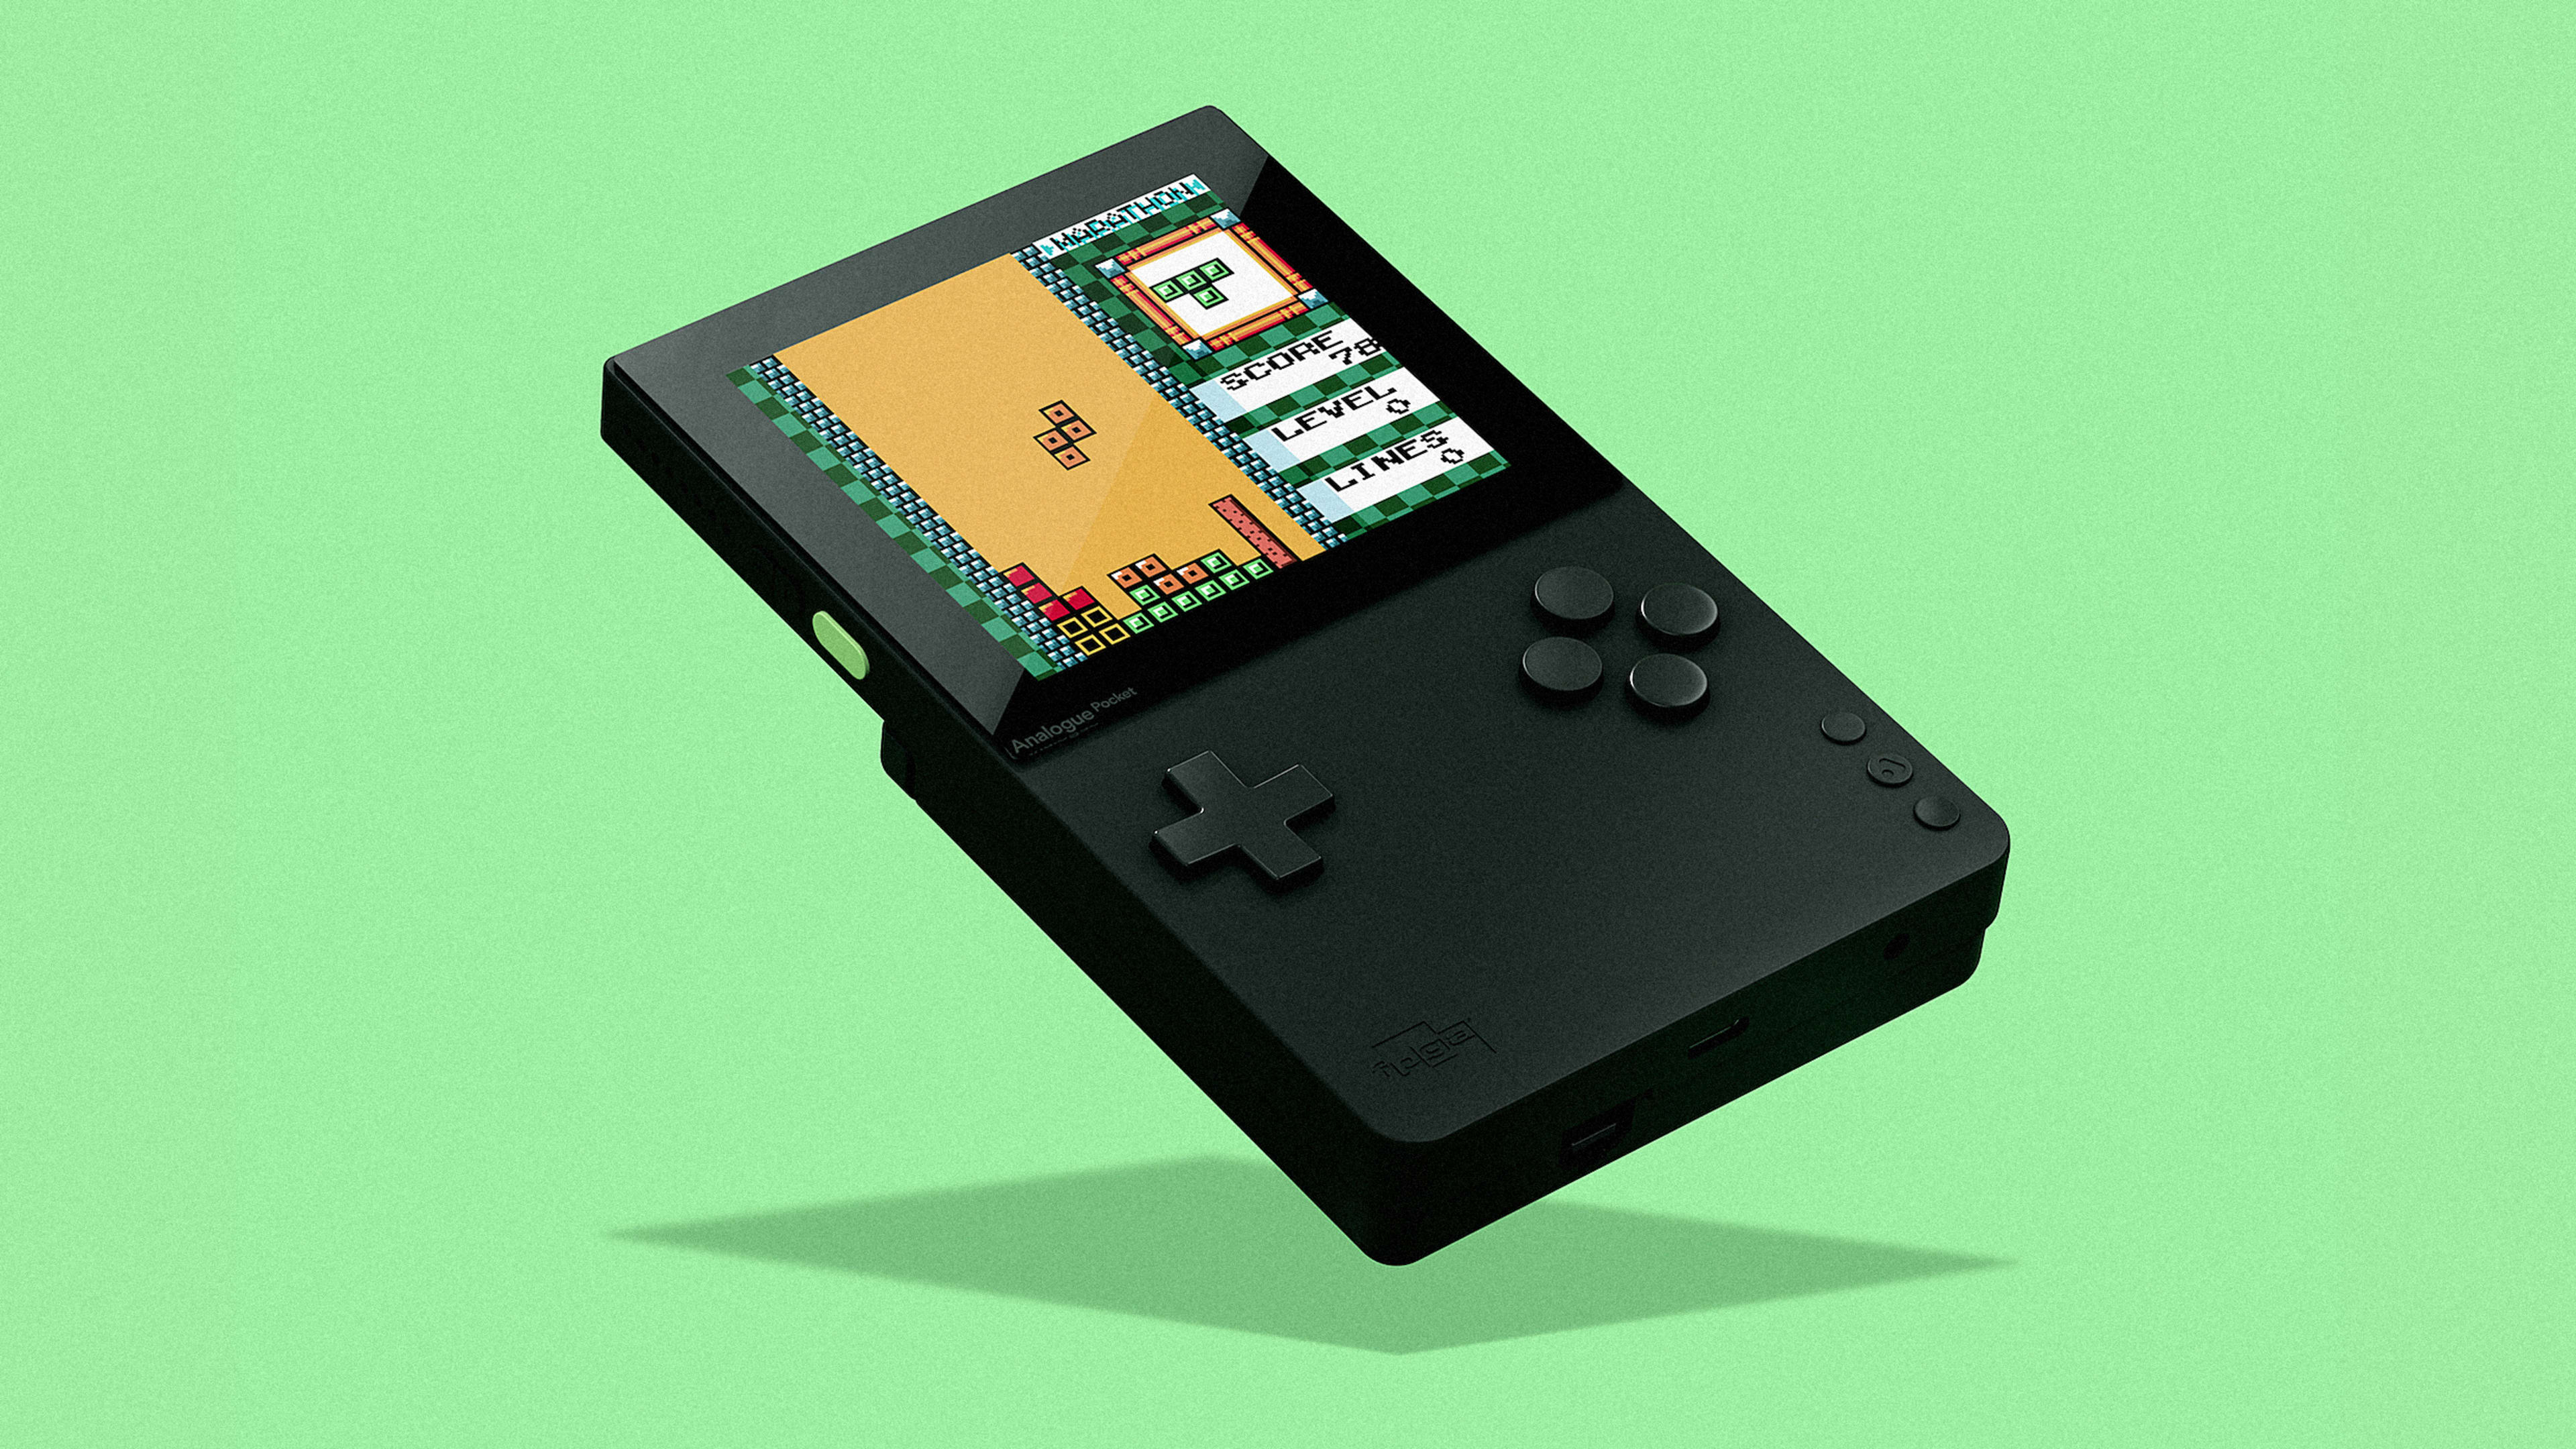 This new gaming device is like a Game Boy for design snobs